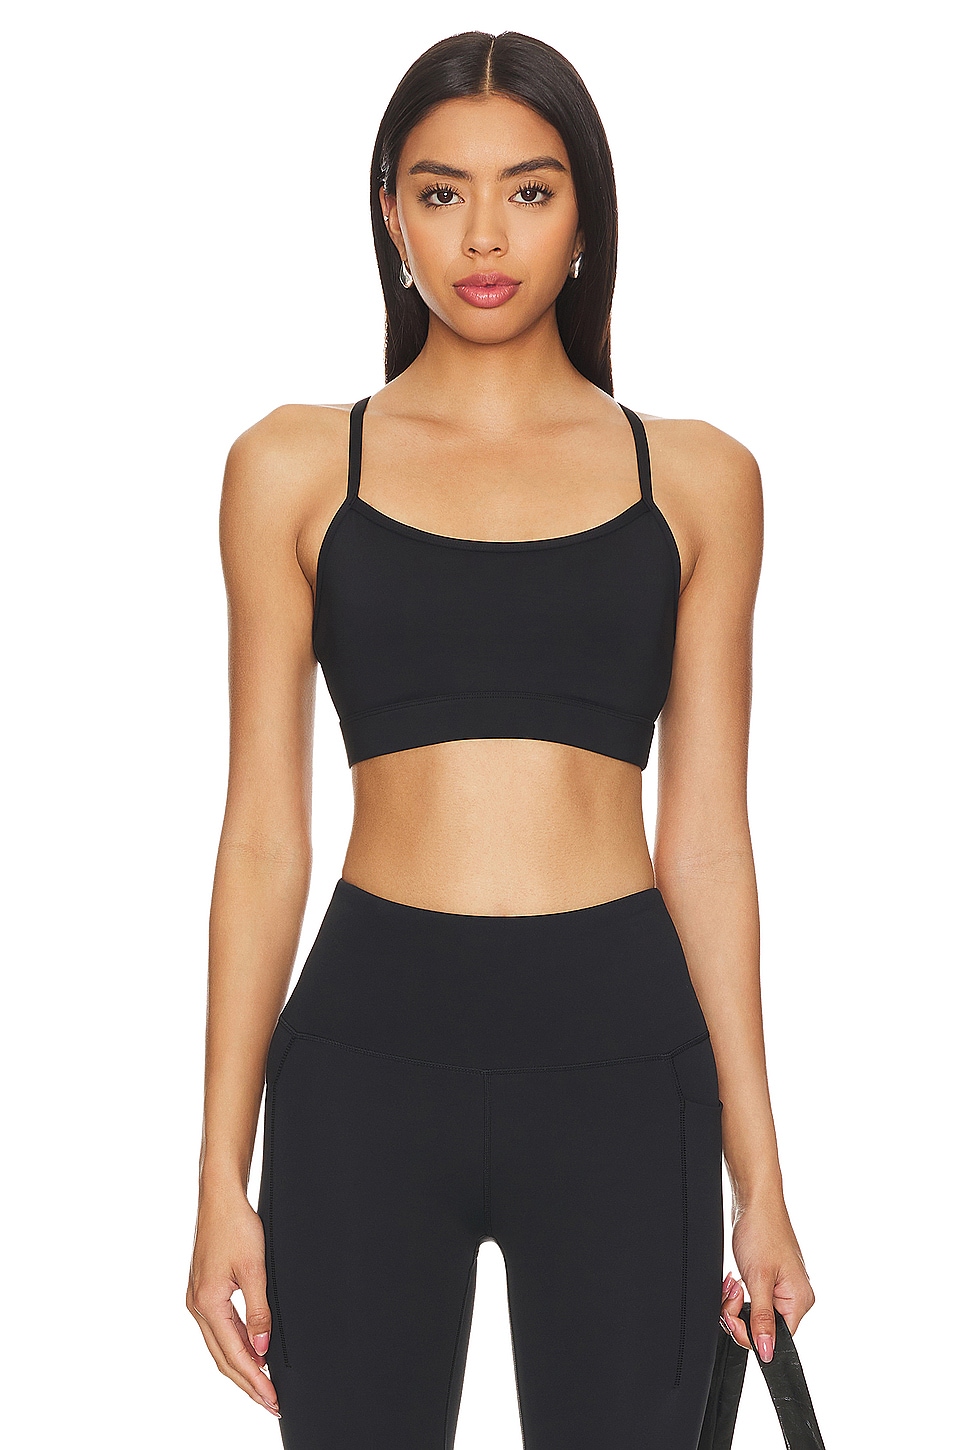 P.E Nation Opponent Sports Bra in Black - (Duplicate Imported from